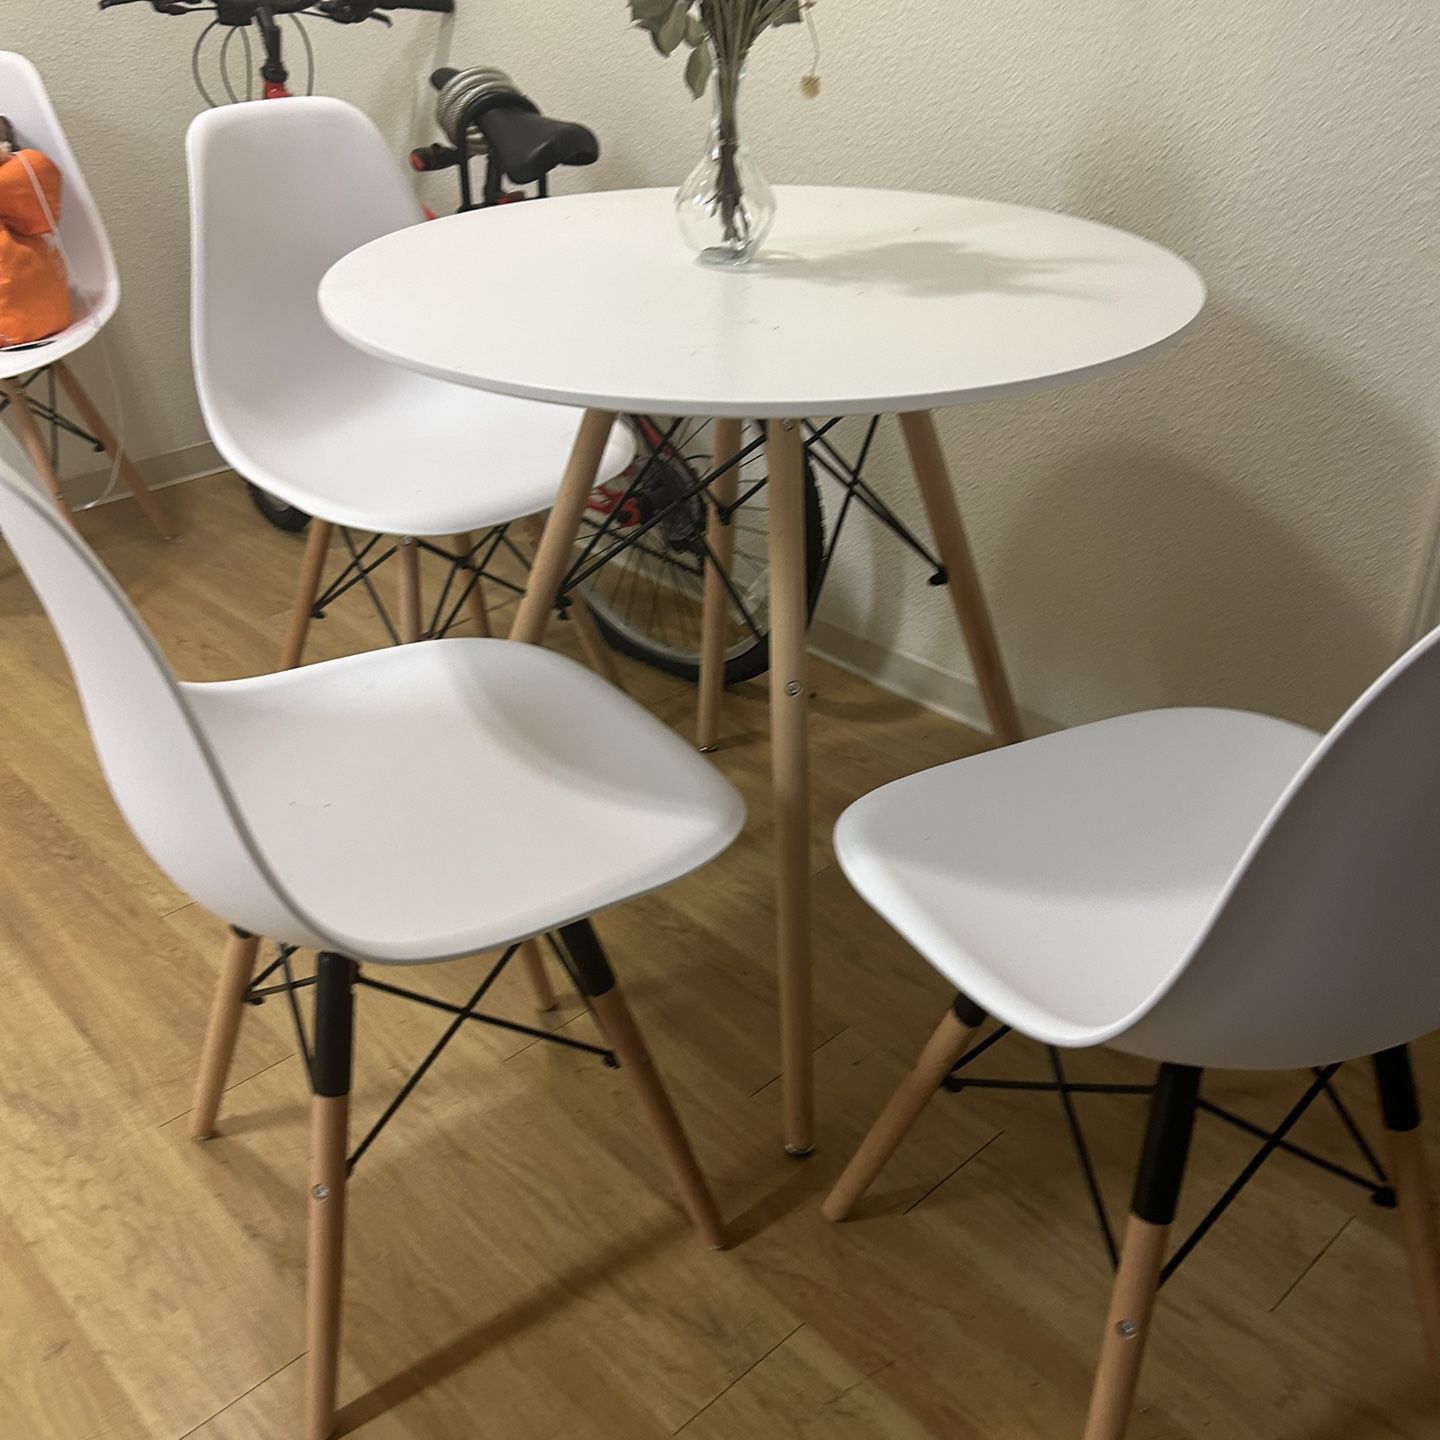 Dining Table W/4 Chairs - In LA 90042 Area 